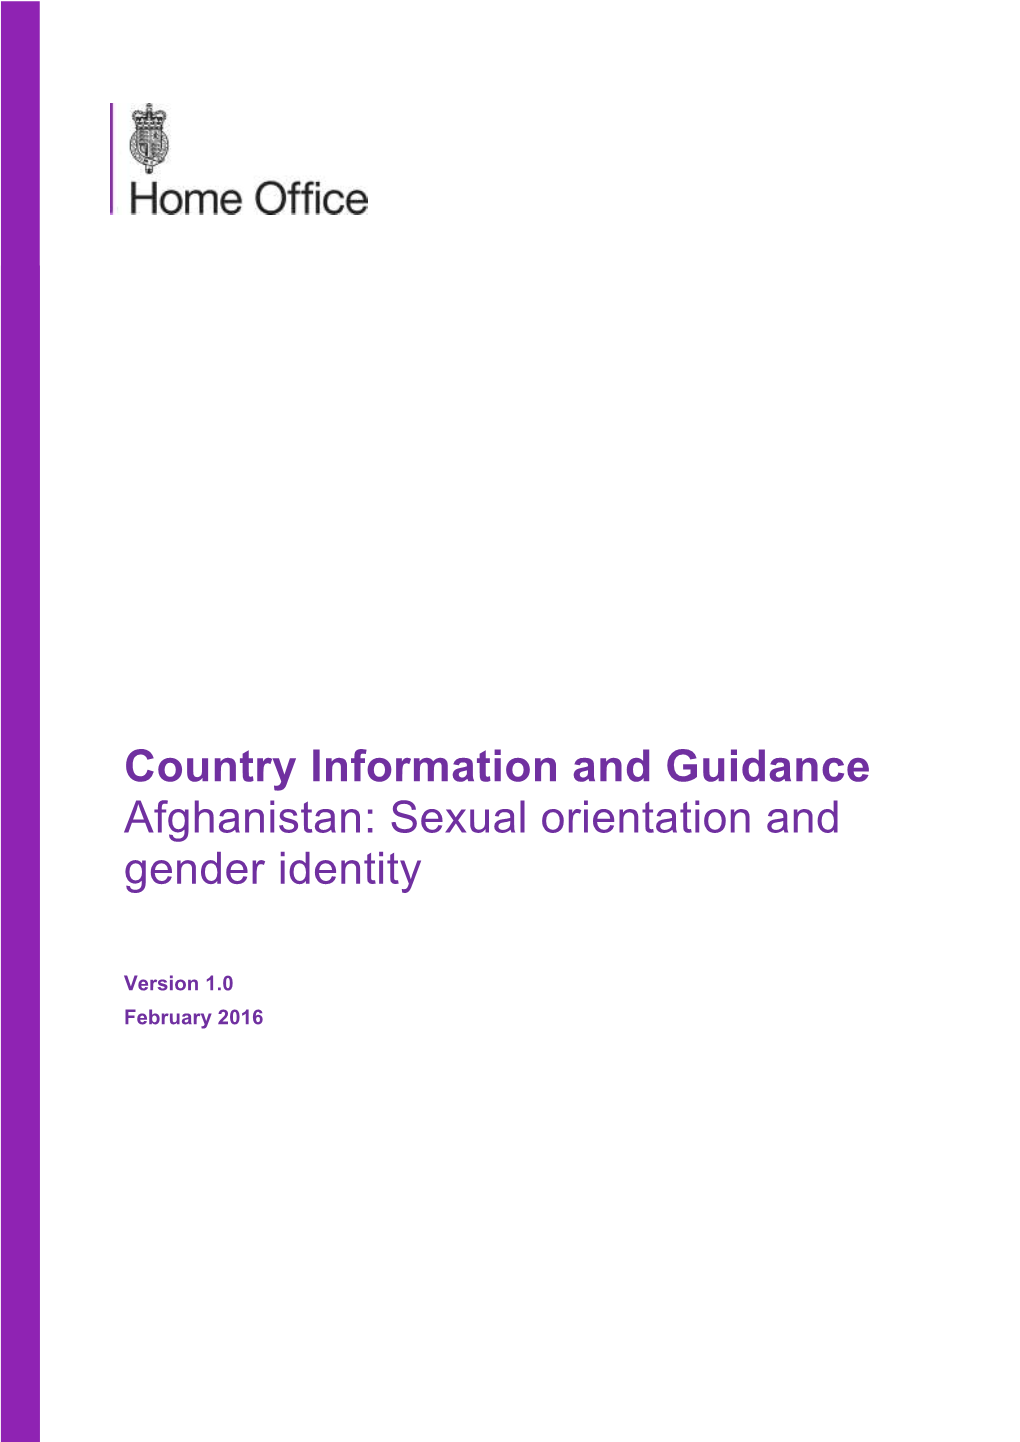 Country Information and Guidance Afghanistan: Sexual Orientation and Gender Identity